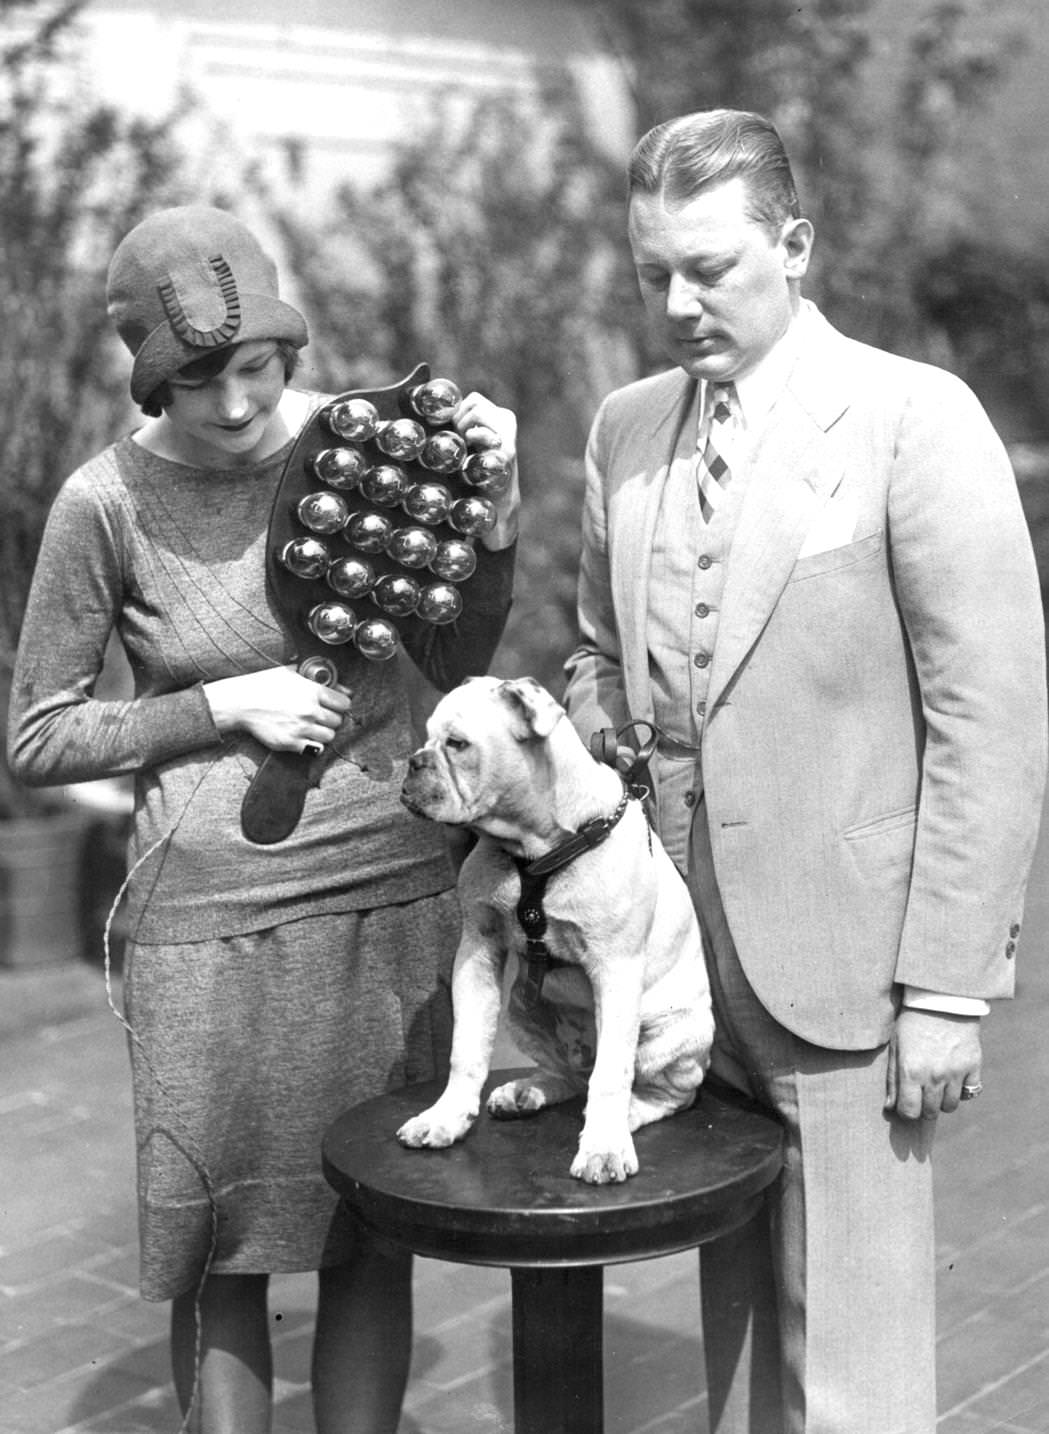 Ethel Lawrence christening the Radio Bull Dog at a ceremony on the roof of the Hotel Astor in New York City, with a christening radio device made by a radio engineer. G Clayton Irwin, 1920